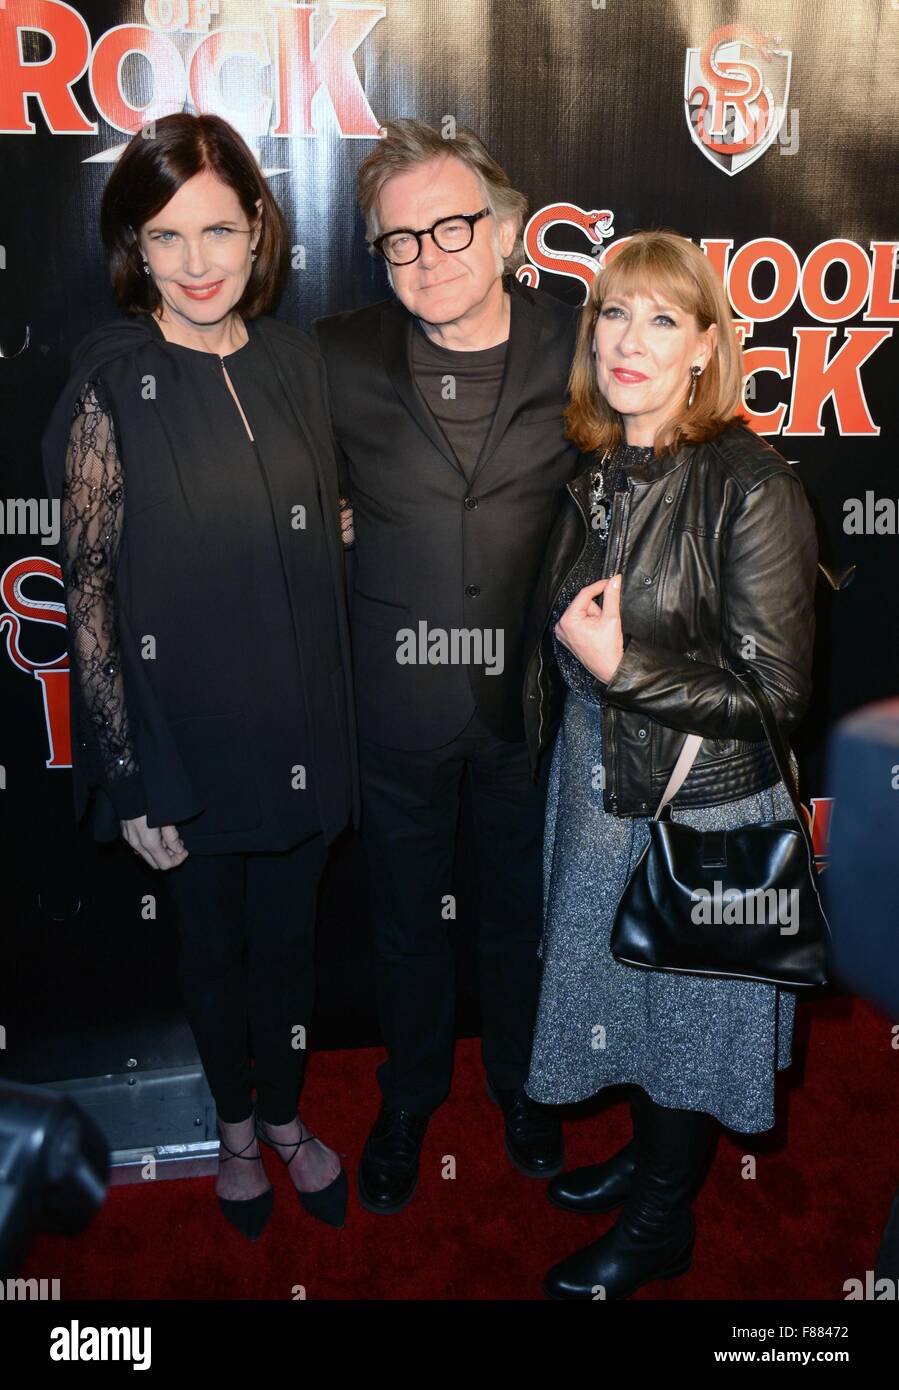 New York, NY, USA. 6th Dec, 2015. Elizabeth McGovern, Kevin McNally, Phyllis Logan at arrivals for SCHOOL OF ROCK Opening Night on Broadway, Winter Garden Theatre, New York, NY December 6, 2015. Credit:  Derek Storm/Everett Collection/Alamy Live News Stock Photo